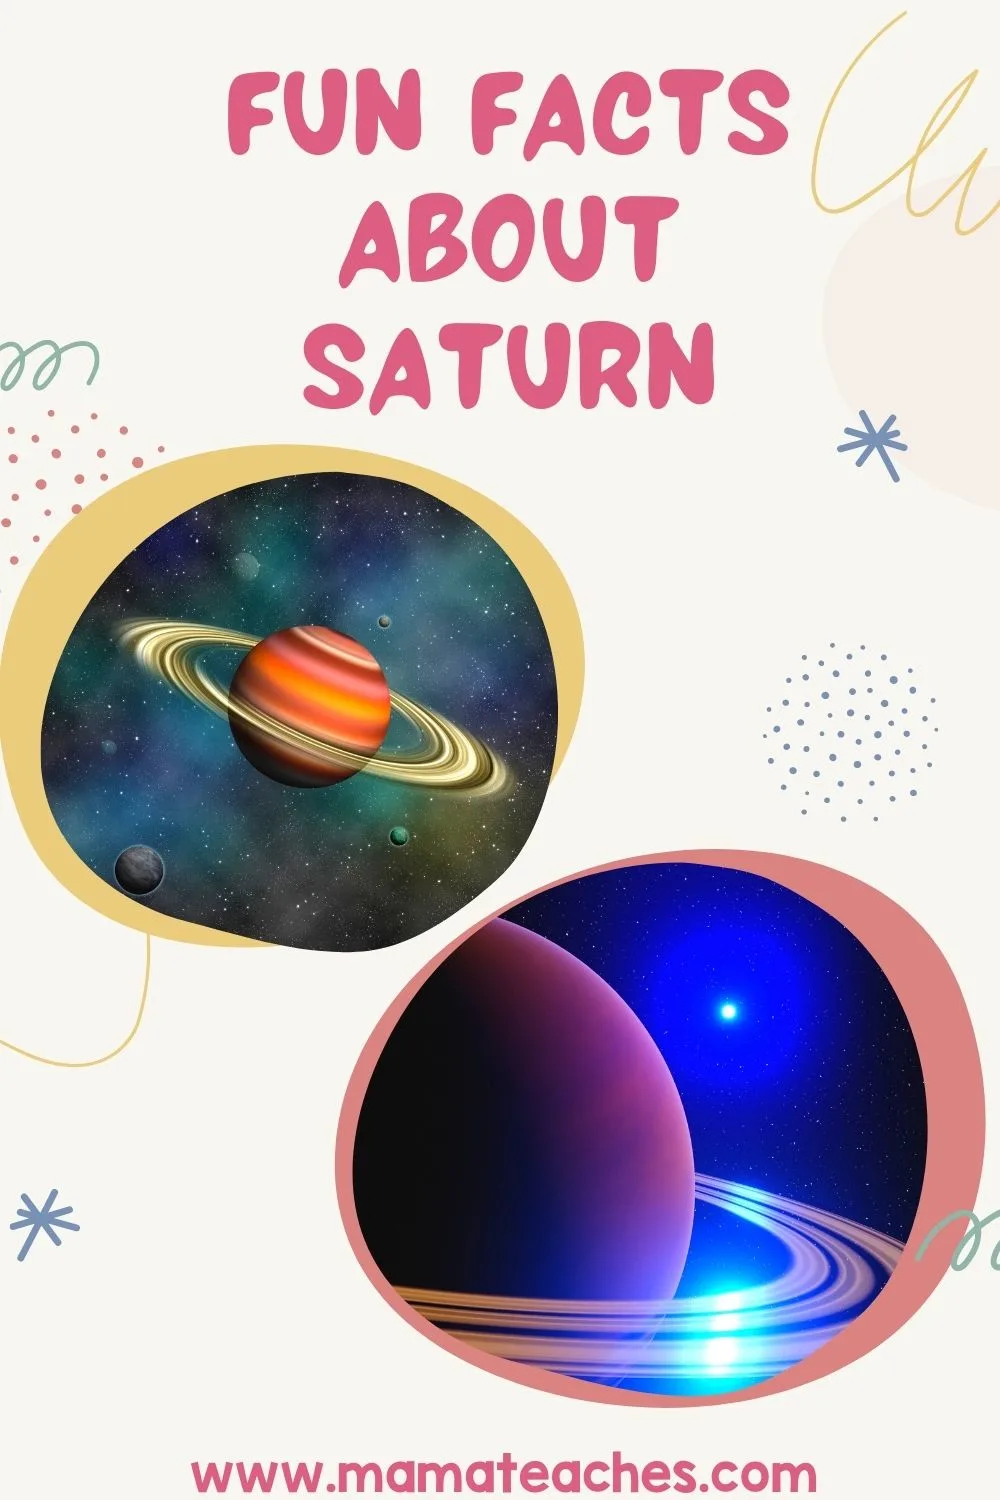 Fun Facts About Saturn